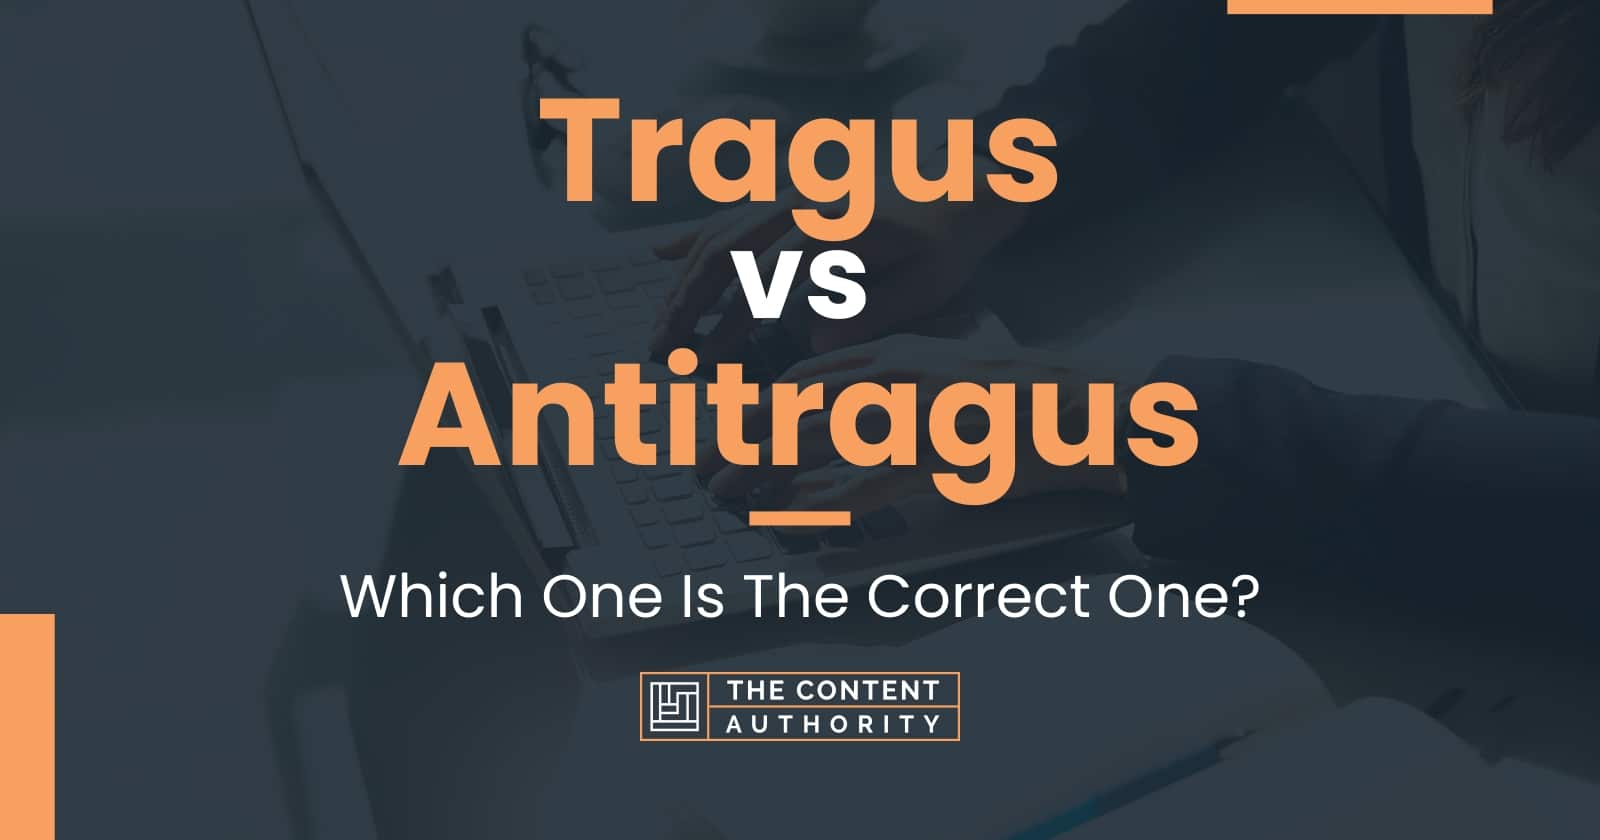 Tragus vs Antitragus: Which One Is The Correct One?